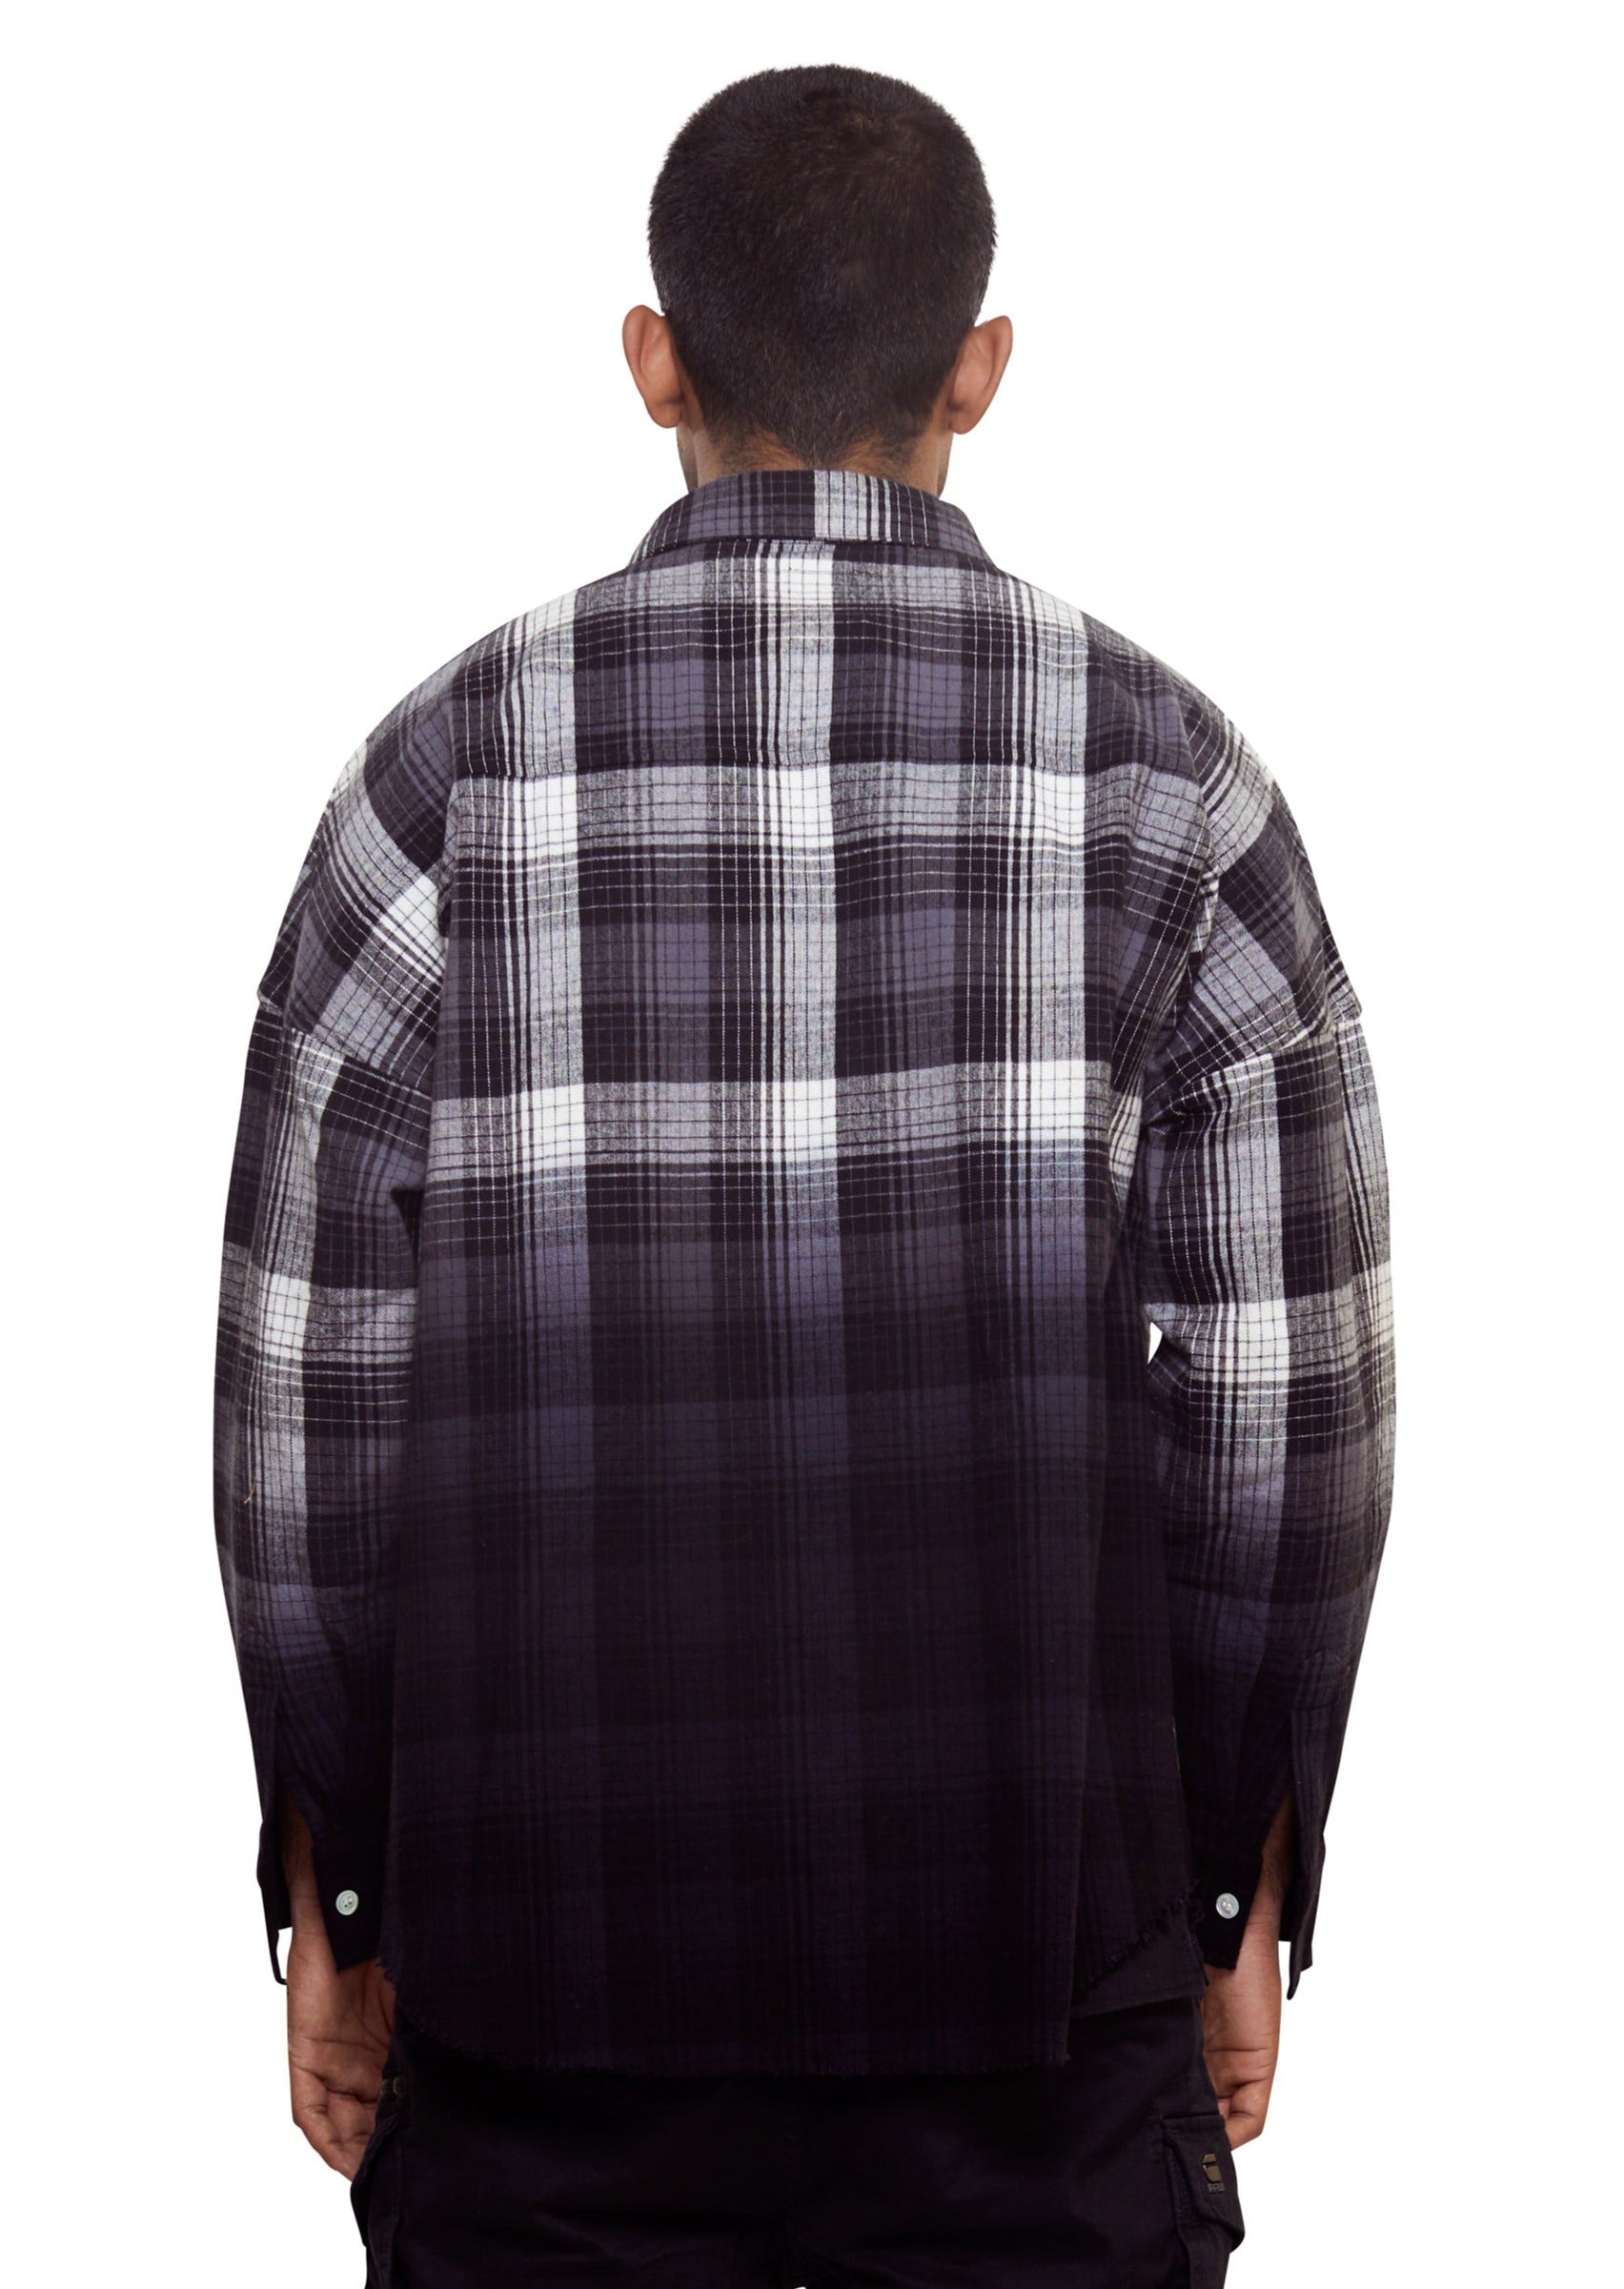 Black full sleeves ombre print checkered shirt with a fire logo from the brand Haculla